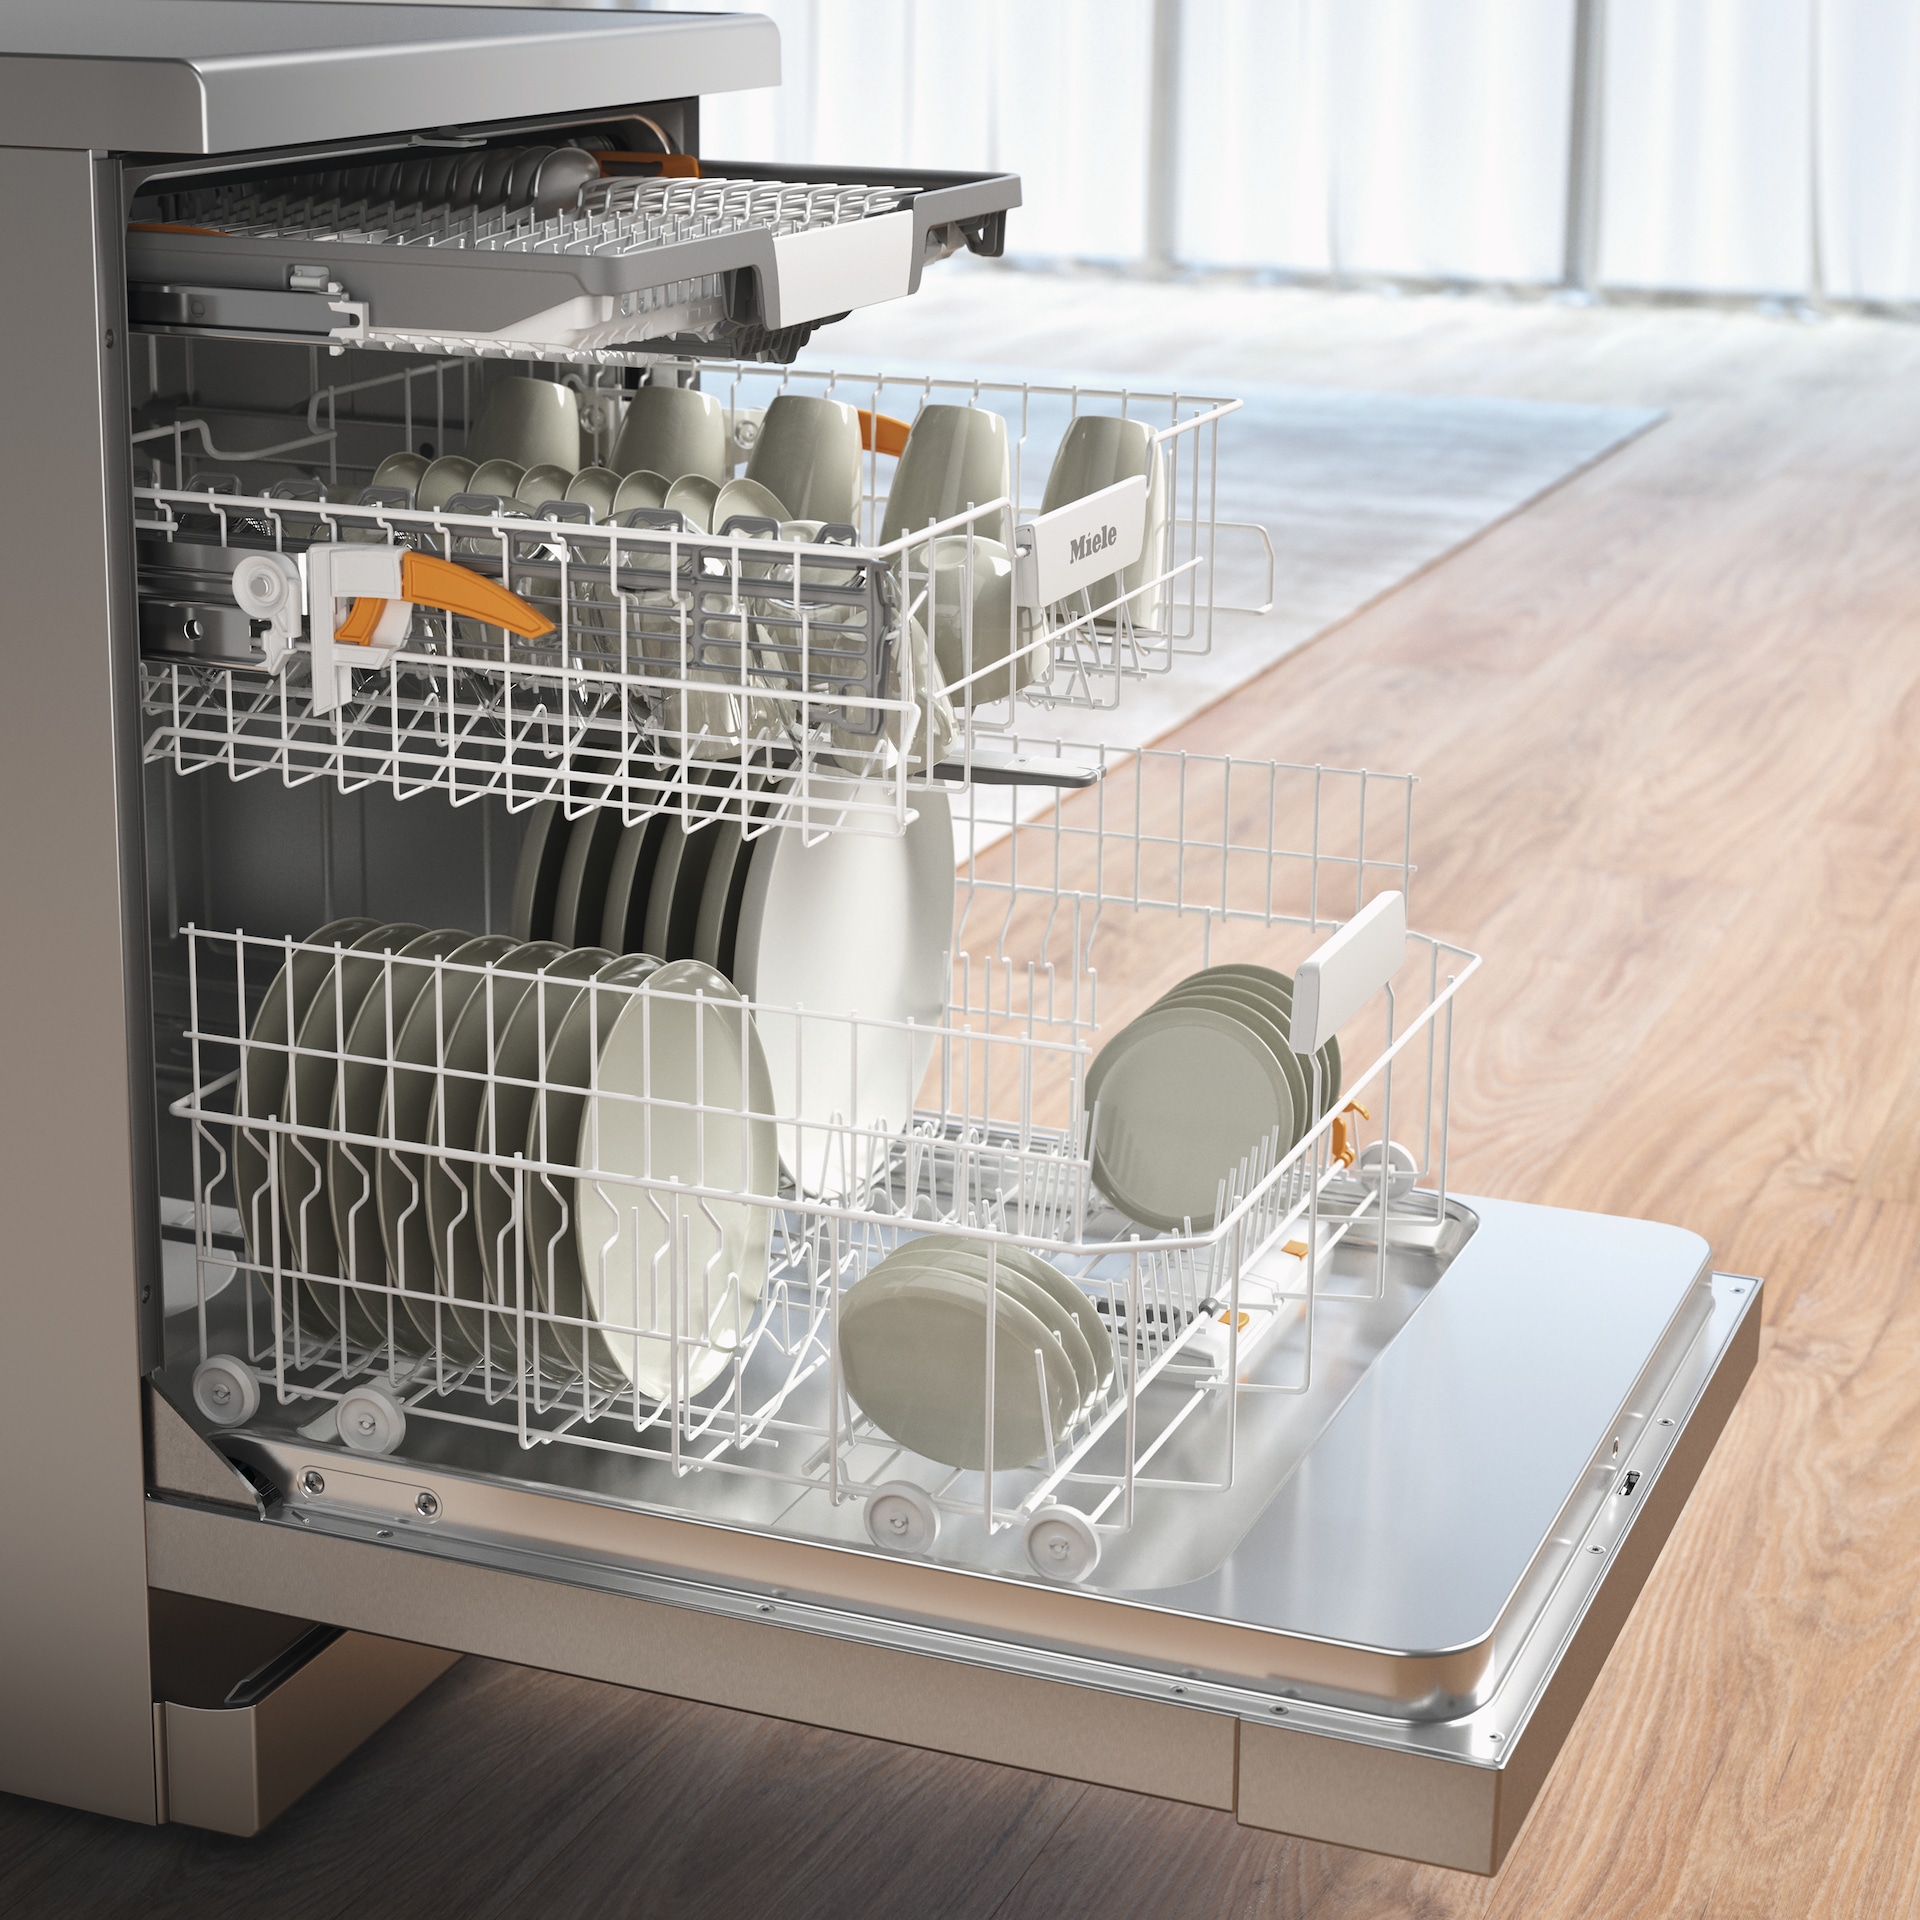 Dishwashers - G 5410 SC Front Active Plus CleanSteel front - 3